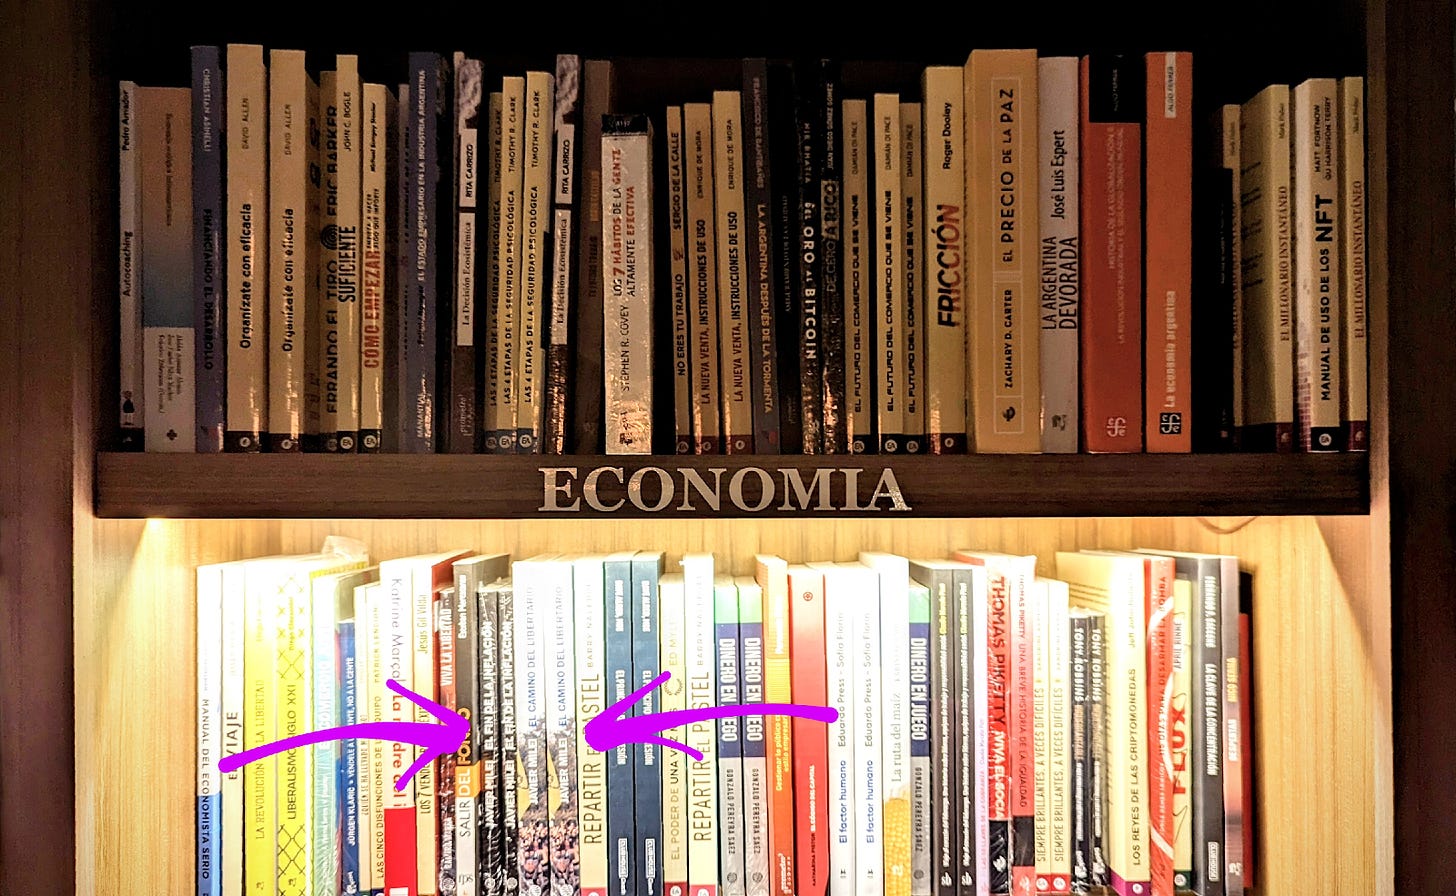 A row of books on a shelf

Description automatically generated